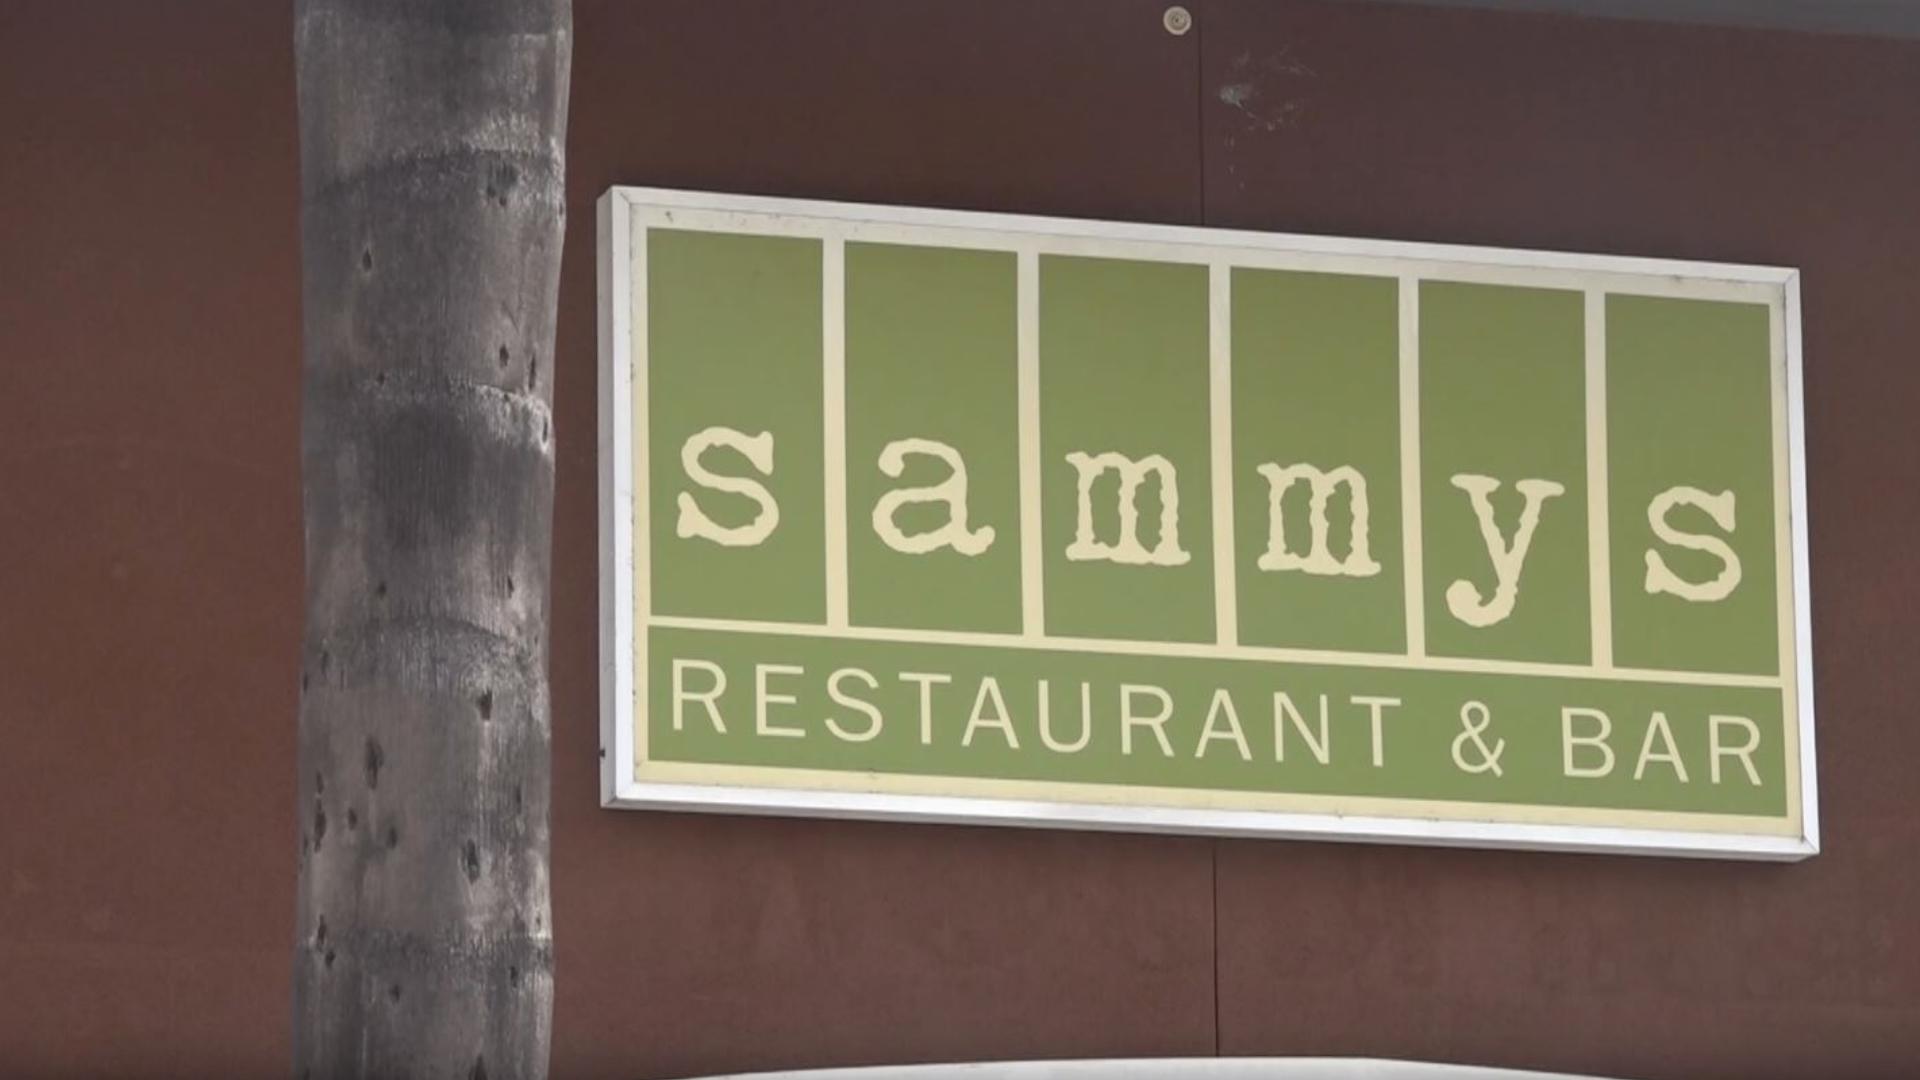 Loyal customers showed up Sammy's on Camino De La Reina for lunch and were disappointed to see workers packing up the restaurant items.